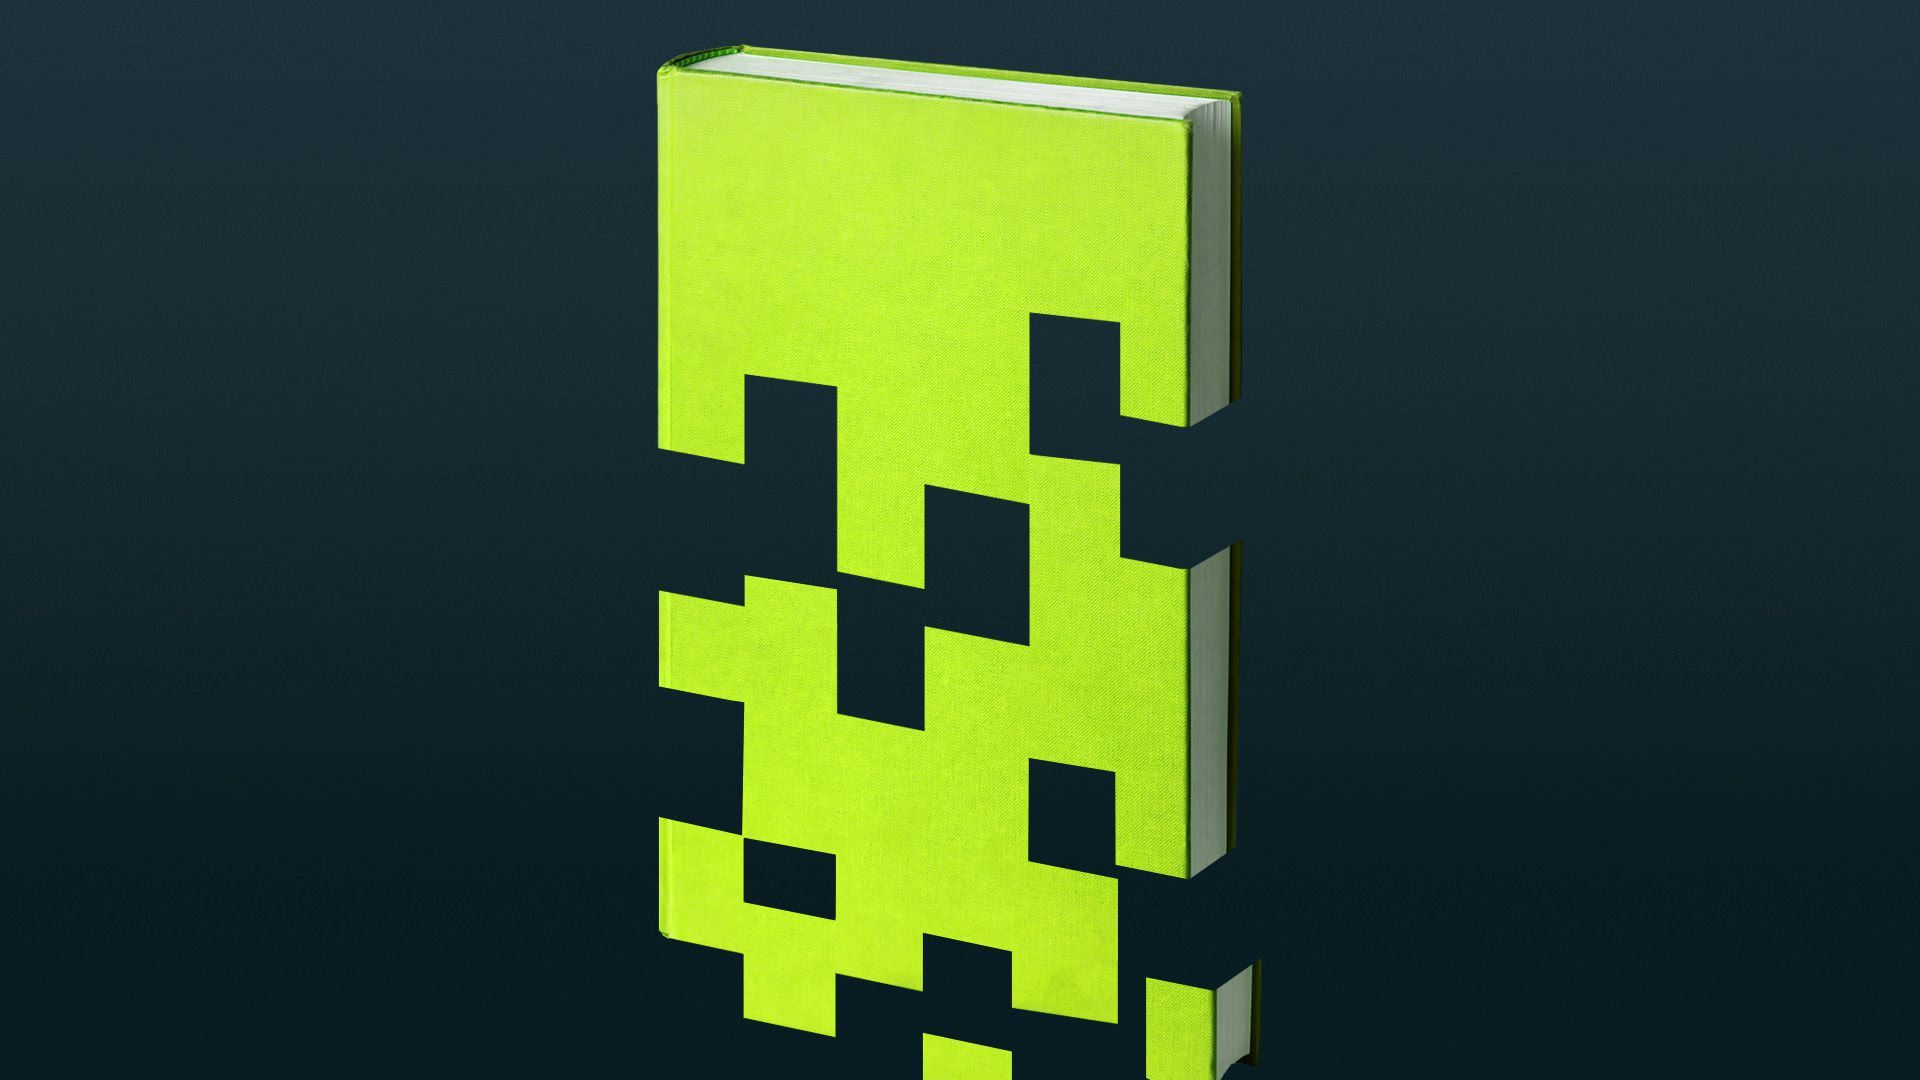 Illustration of a book appearing to pixelate and disintegrate towards the bottom